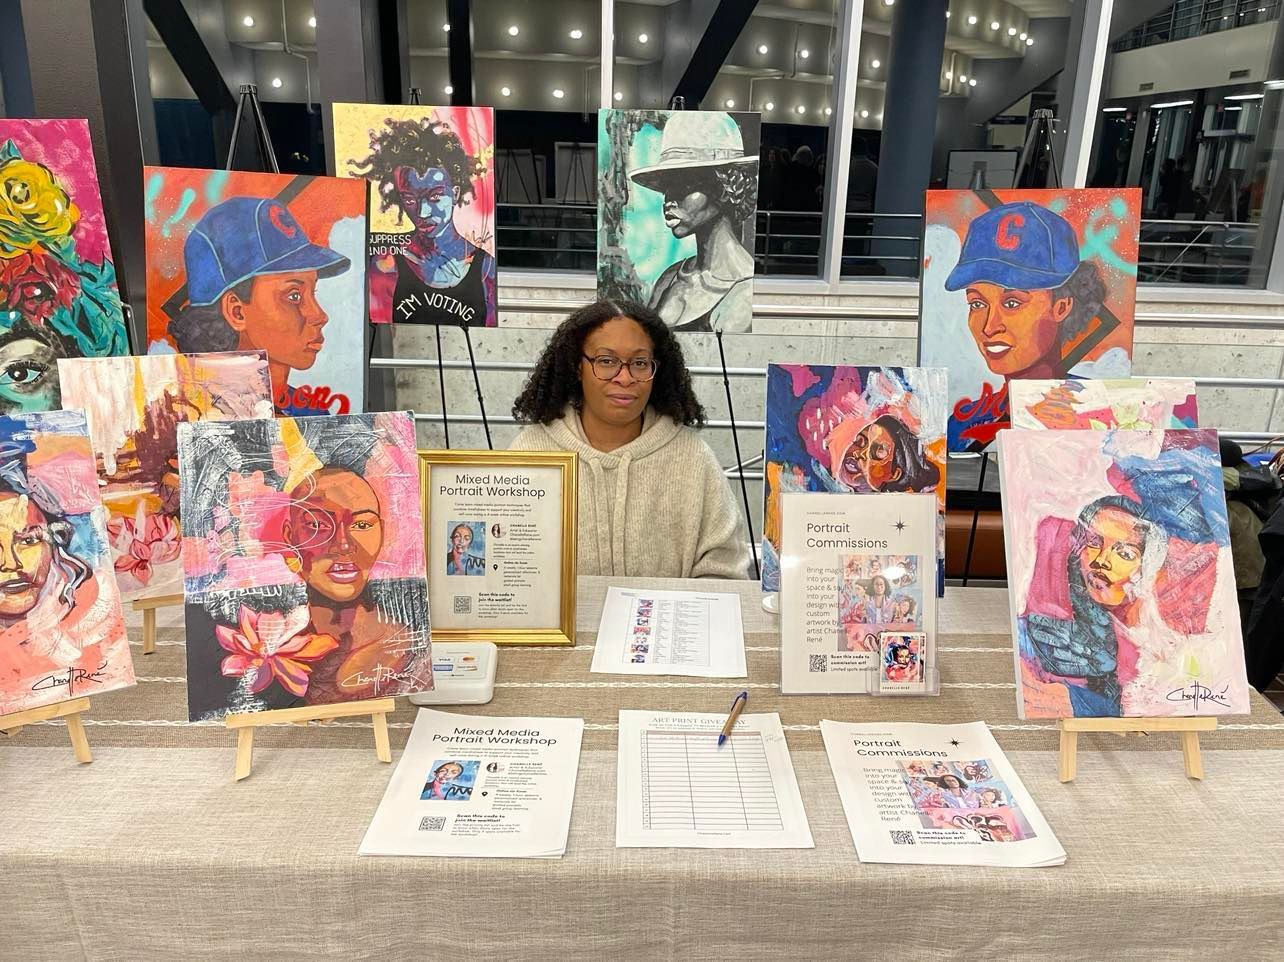 Chanelle René, an award winning artist who explores themes of diverse beauty, freedom and self-discovery, showed her work before the play at the Stockton University Performing Arts Center. Photo Credit: Mark Tyler